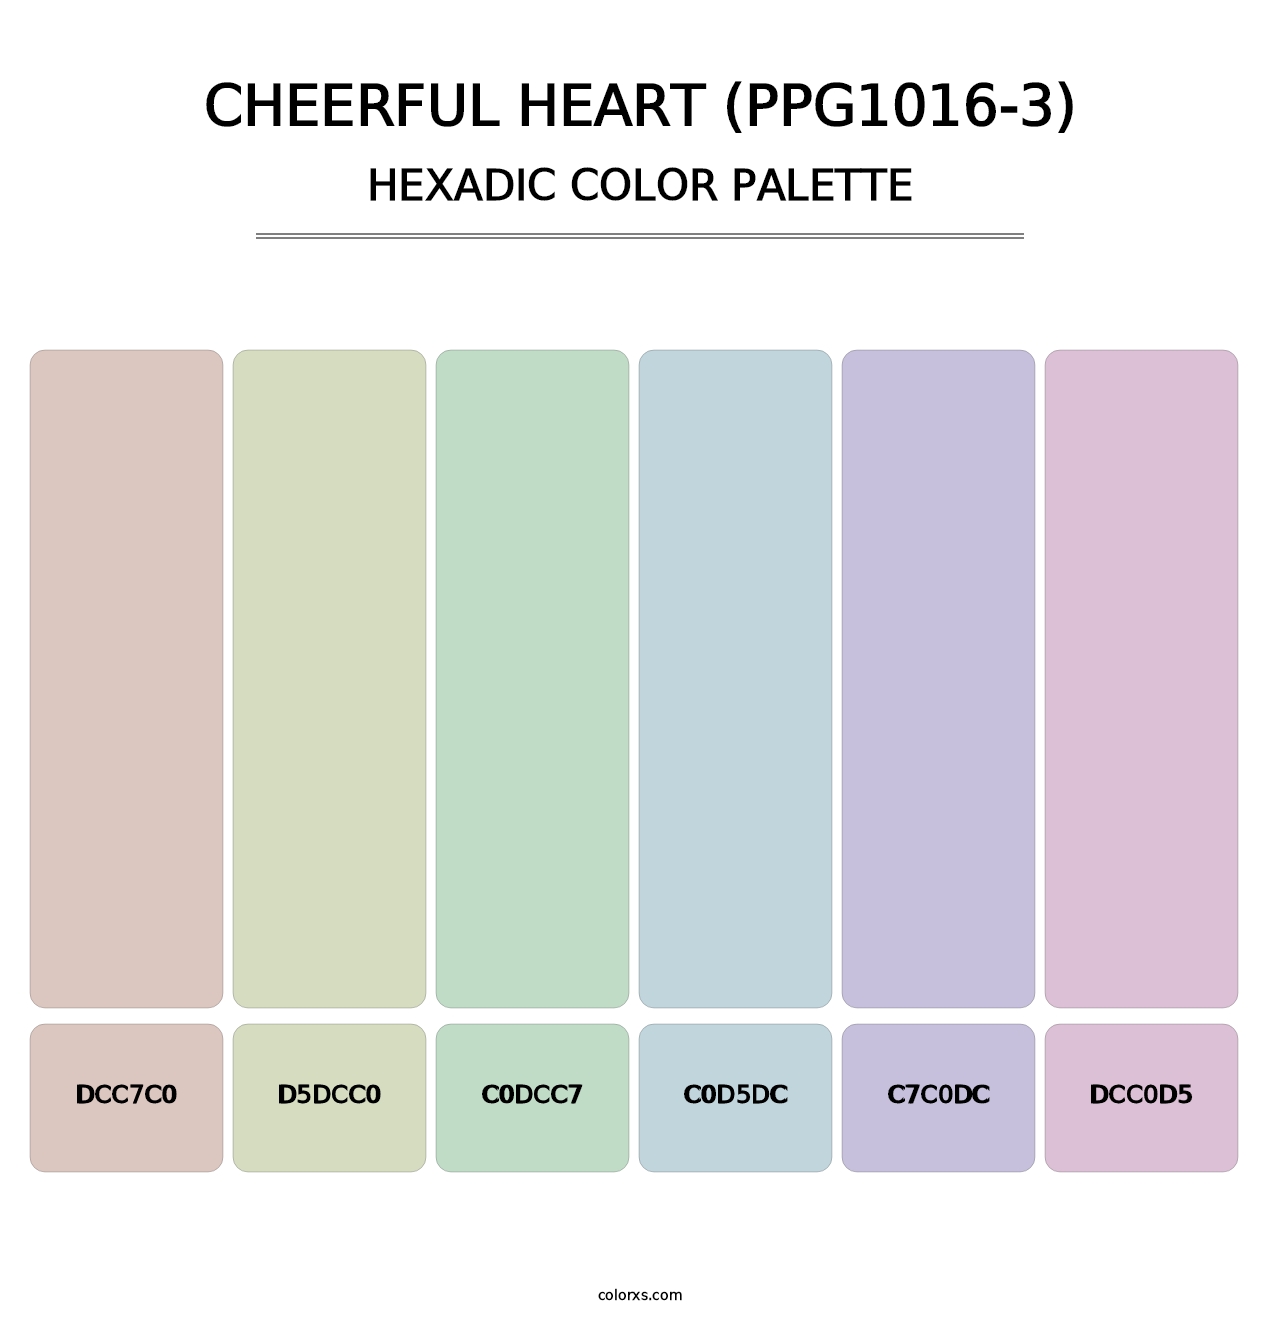 Cheerful Heart (PPG1016-3) - Hexadic Color Palette